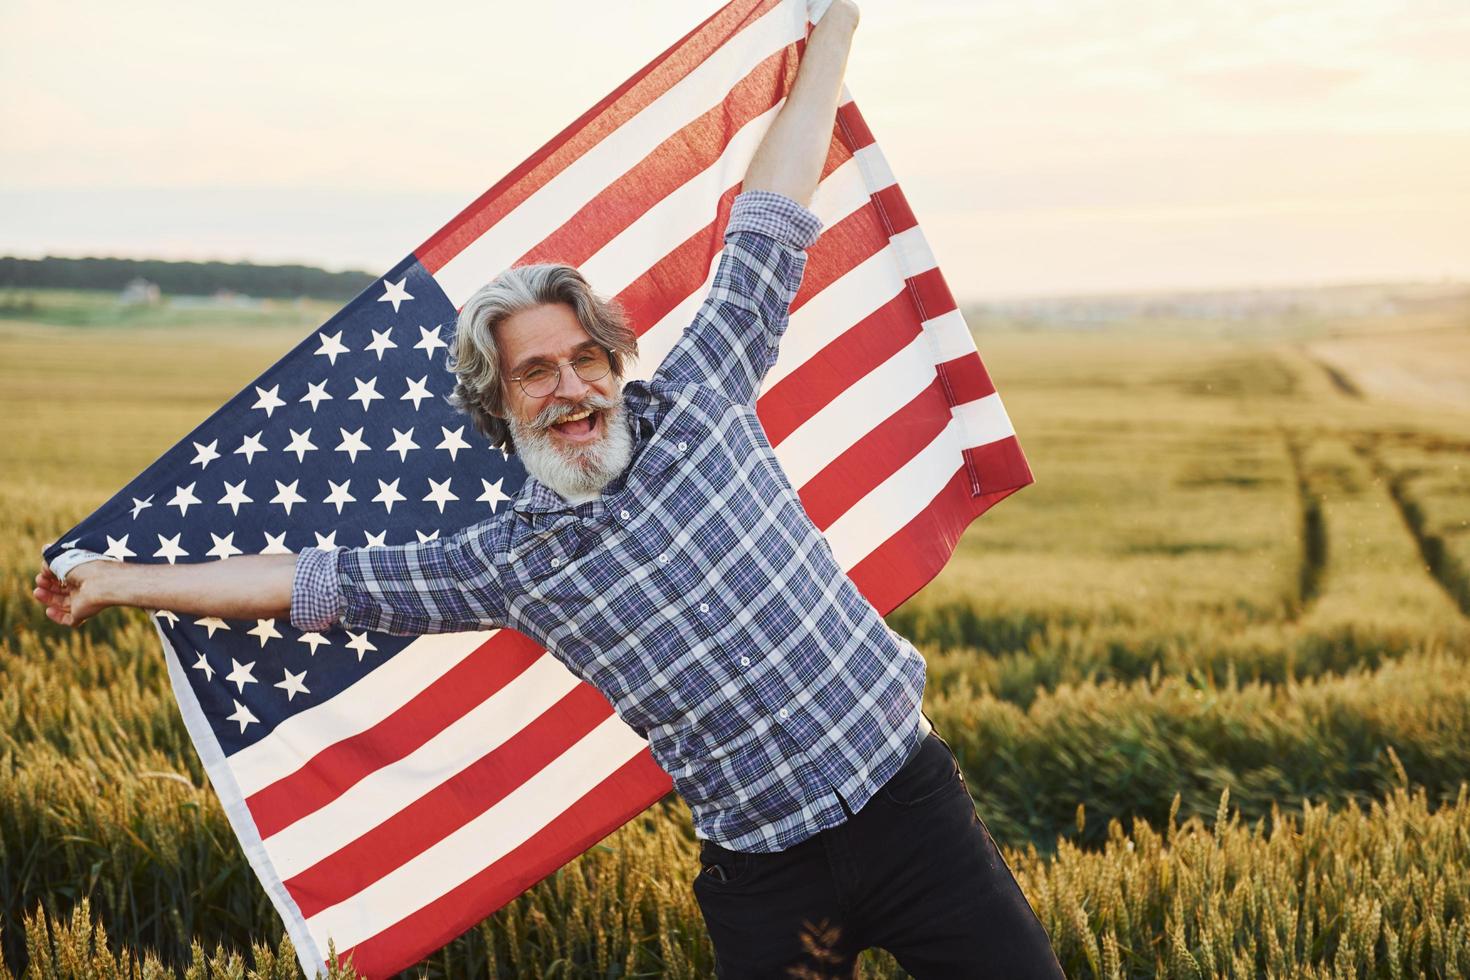 Holding USA flag in hands. Patriotic senior stylish man with grey hair and beard on the agricultural field photo